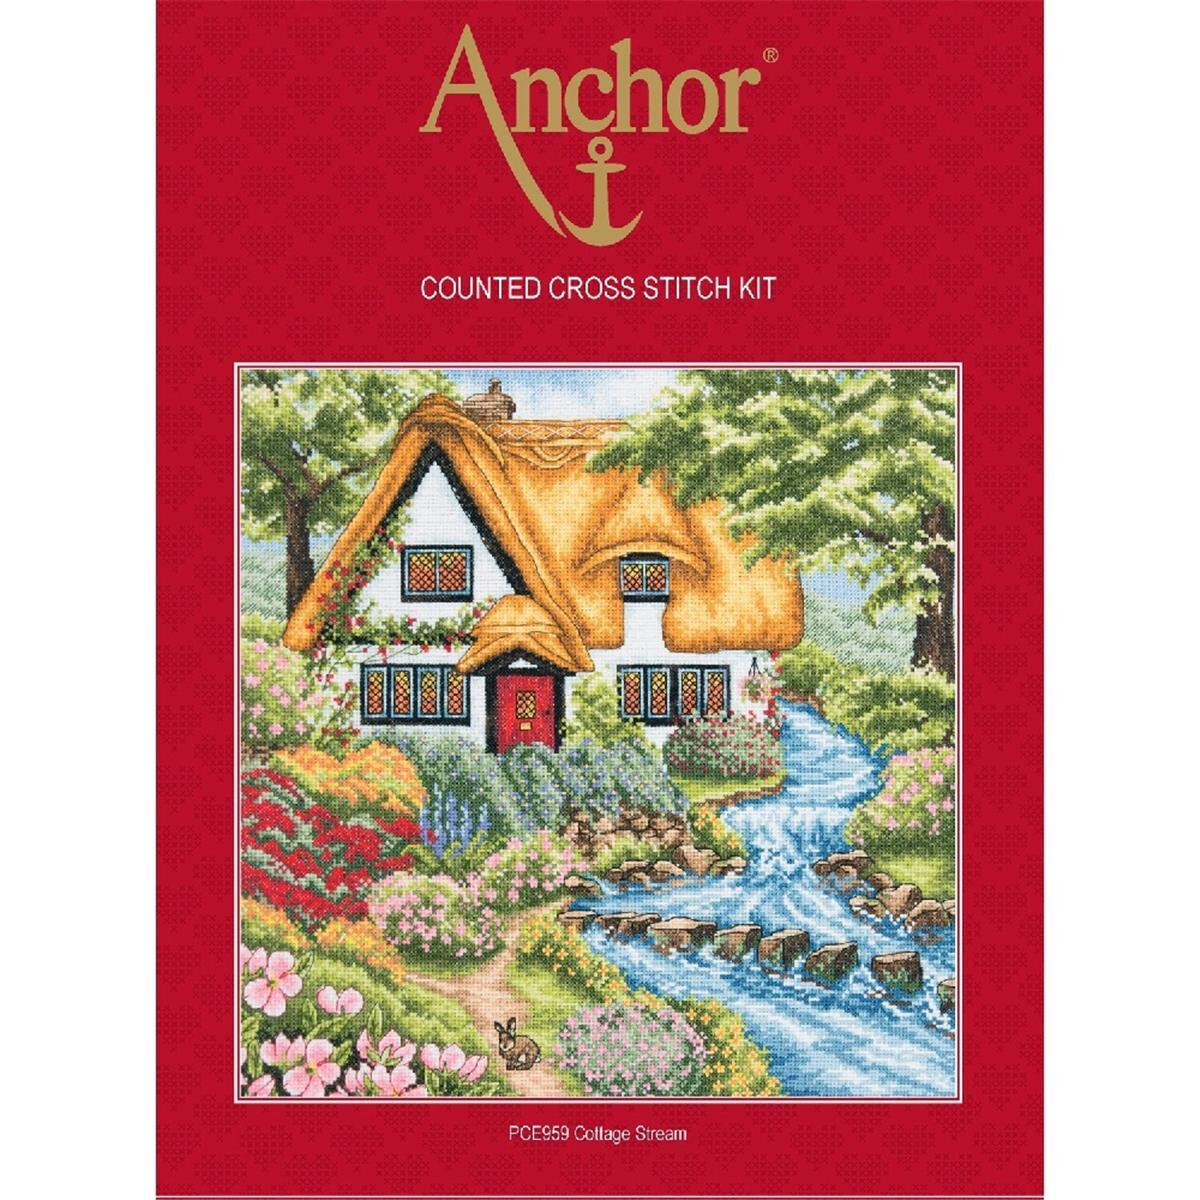 Anchor counted Cross Stitch kit "Cottage...